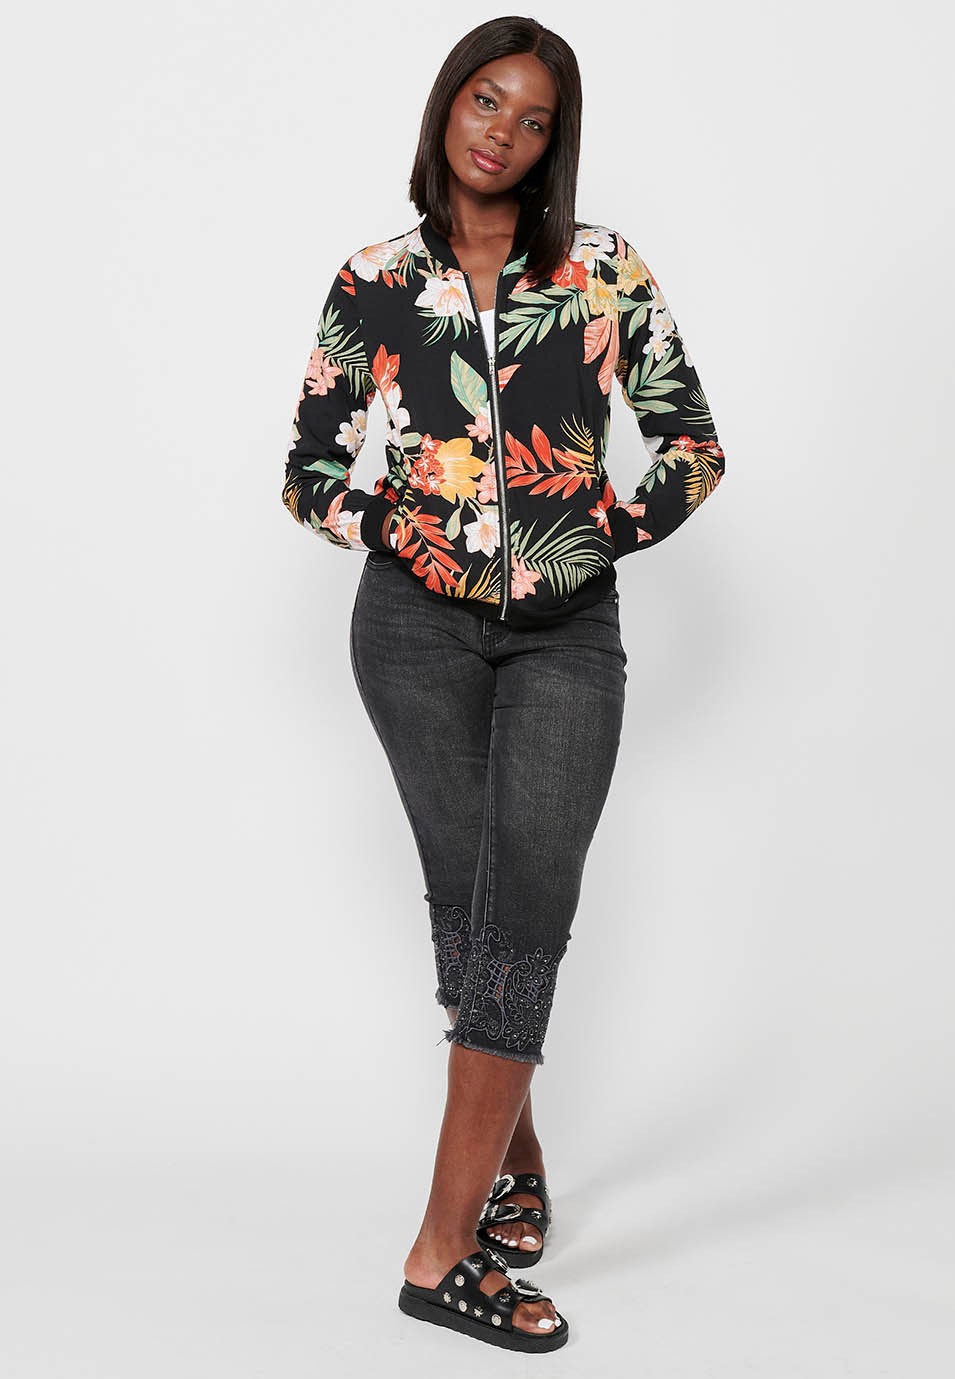 Long-sleeved sweatshirt jacket with ribbed finishes and floral print with front zipper closure in Multicolor for Women 4